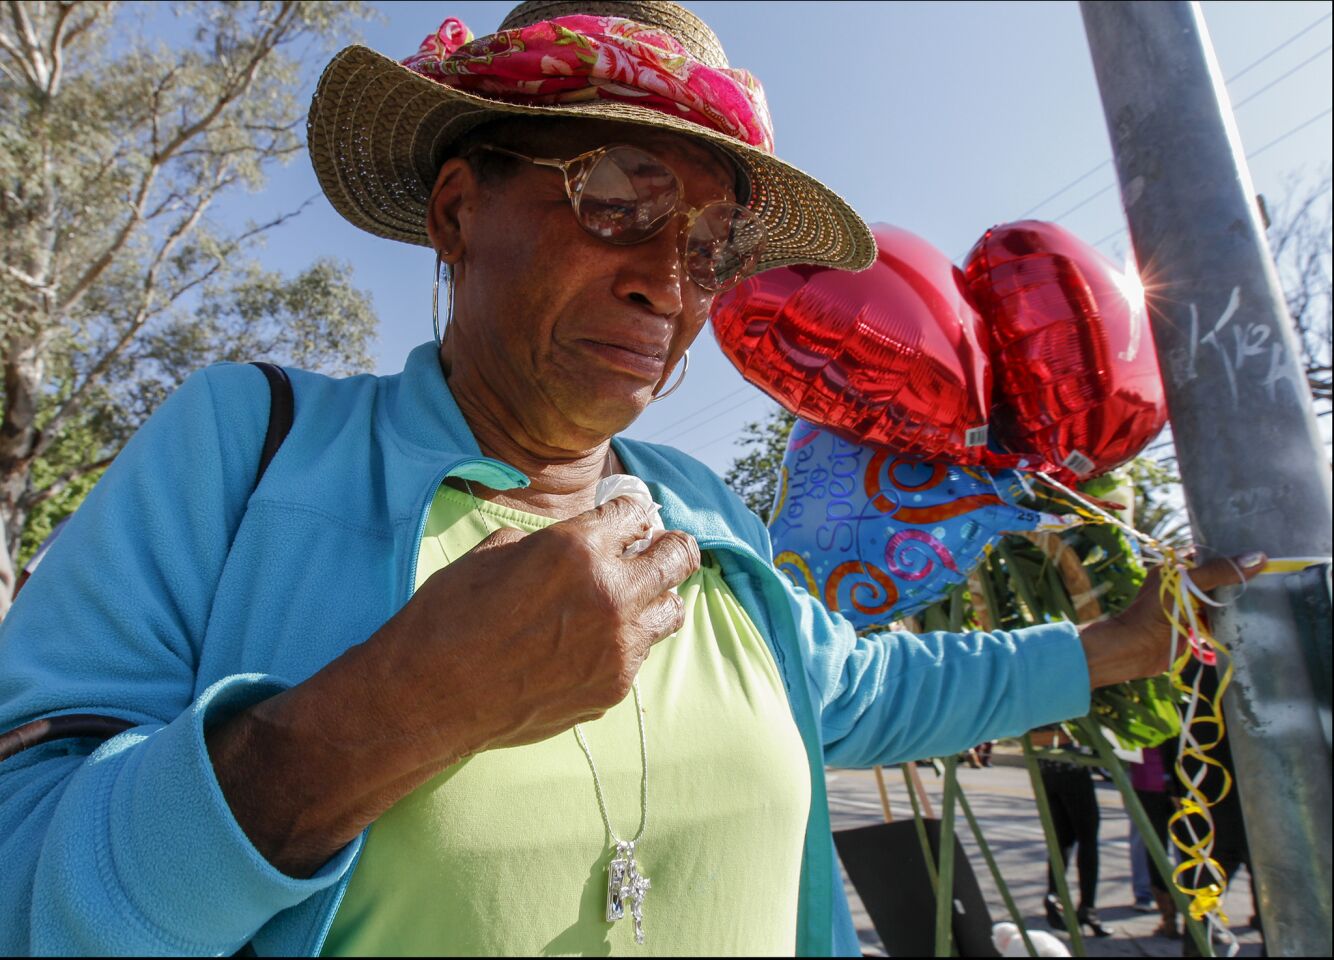 Bobbie Haywood, who lives in the neighborhood, stops by to pay respect at a makeshift memorial for the shooting victims at North Park Elementary School in San Bernardino.